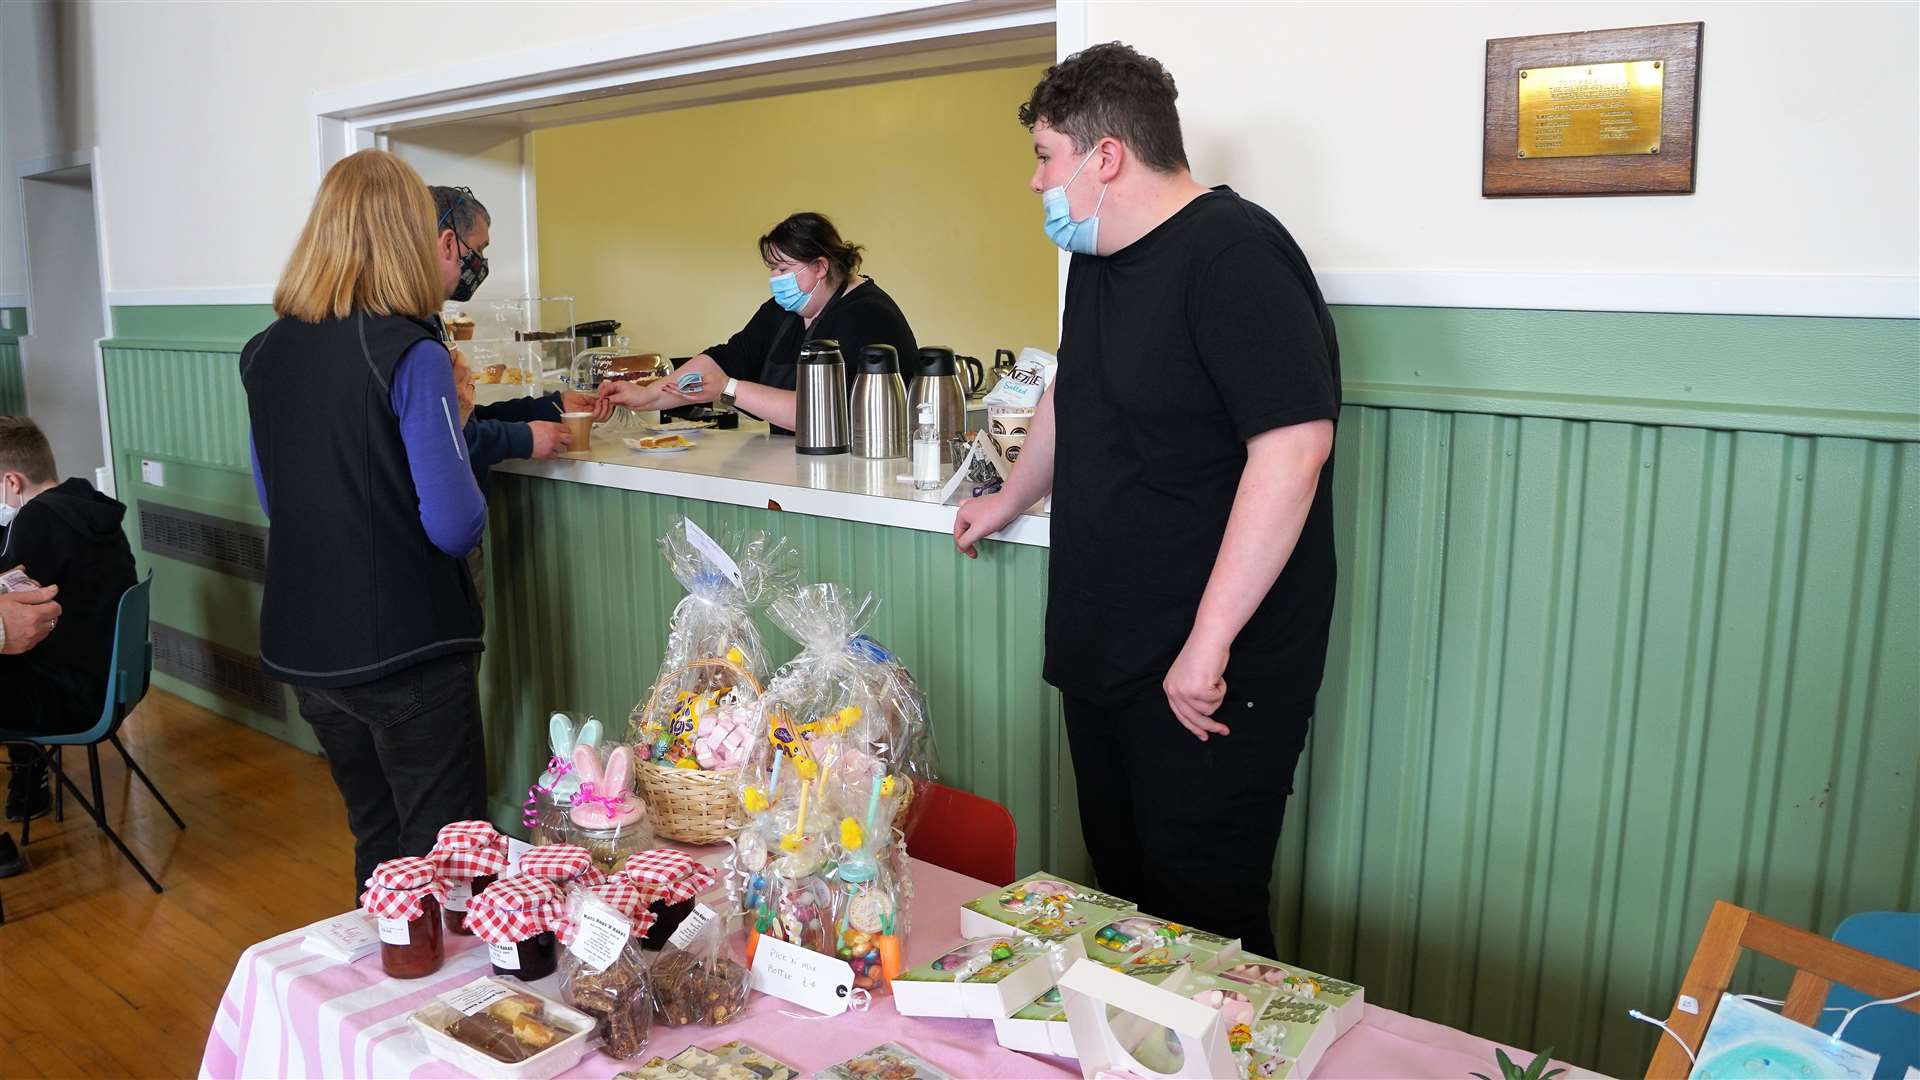 Kat's Kups 'n' Kakes provided refreshments and snacks on the day: Picture: DGS